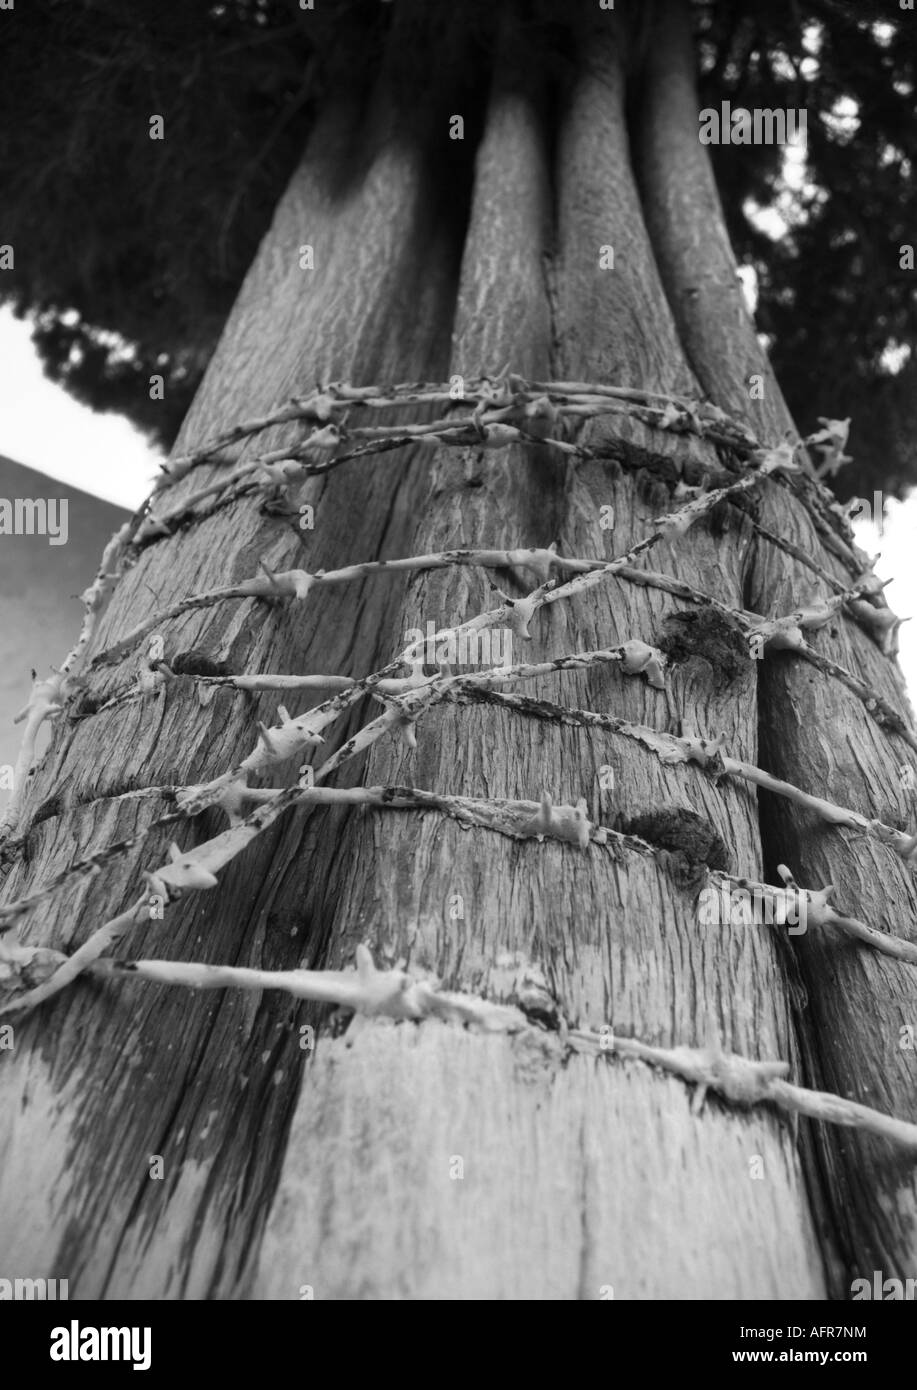 Tree trunk wrapped with barbed wire. Stock Photo